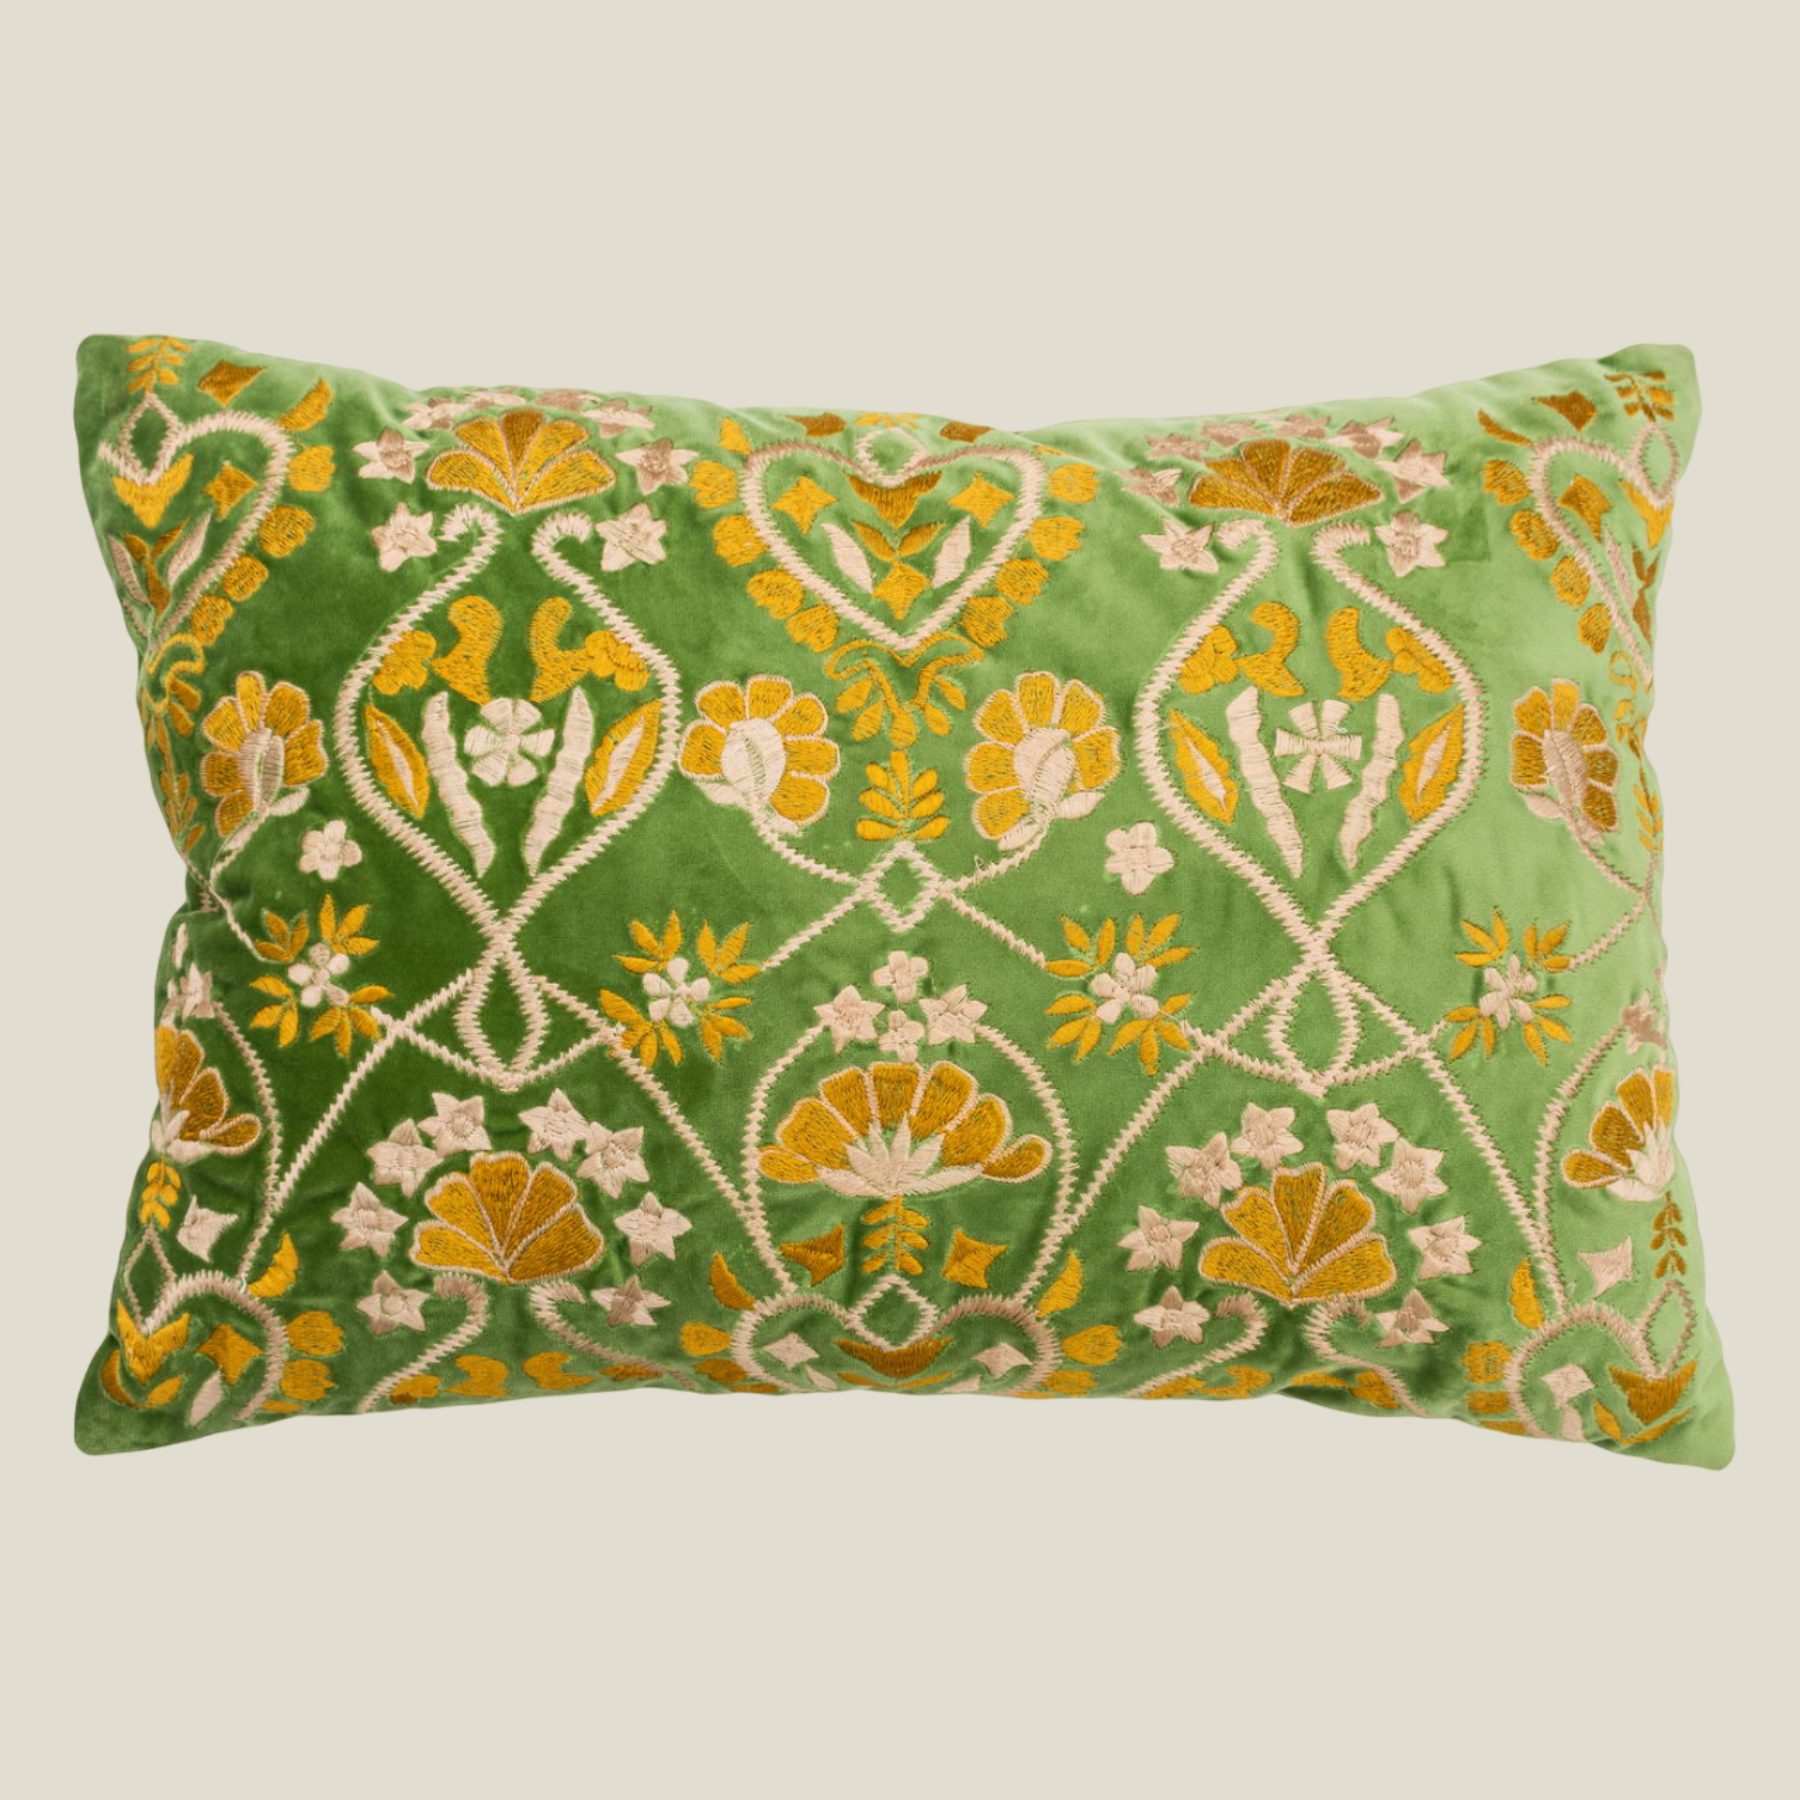 The Luxelife Green Velvet Floral Fully Embroidered Cushion Cover